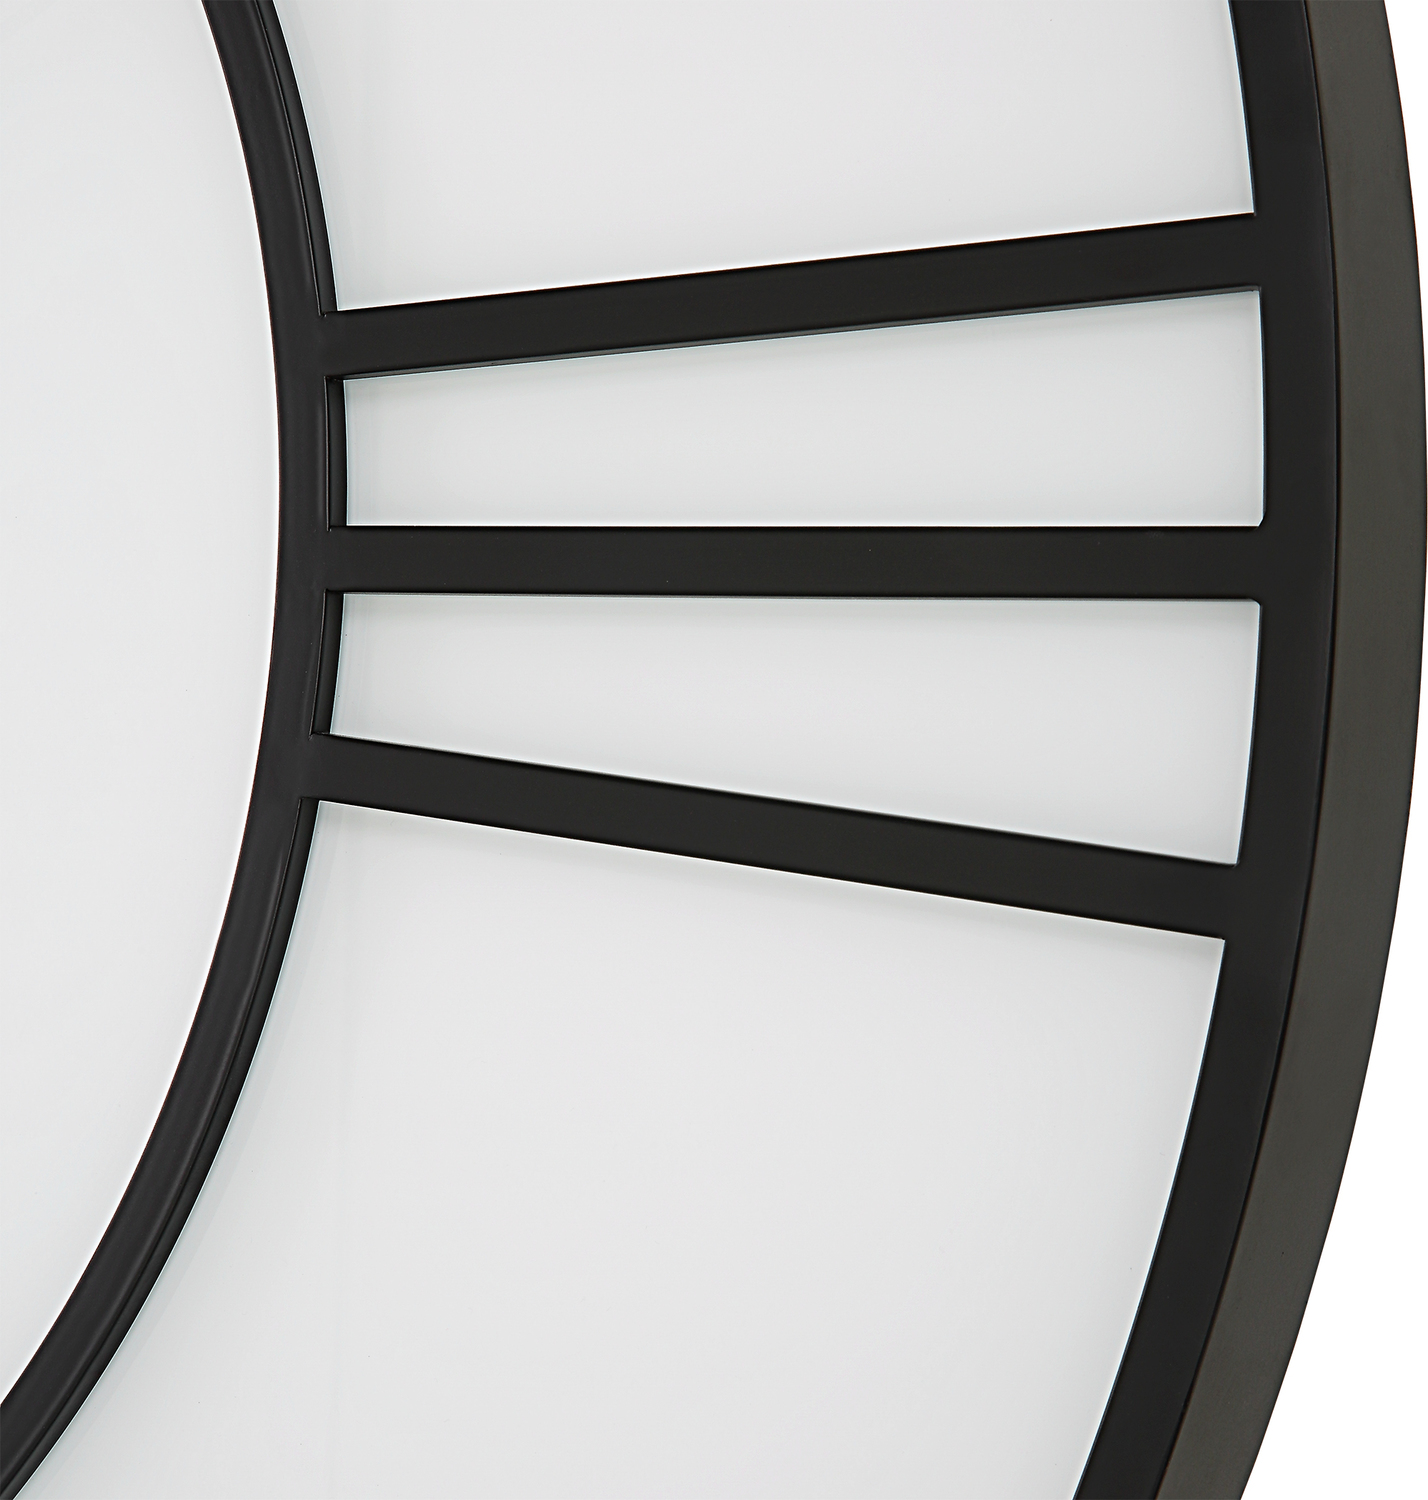 decorative table clocks Uttermost Wall Clocks Modern Style Wall Clock Featuring A Matte Black Frame And A White Glass Face. Quartz Movement Ensures Accurate Timekeeping. Requires One "AA" Battery.